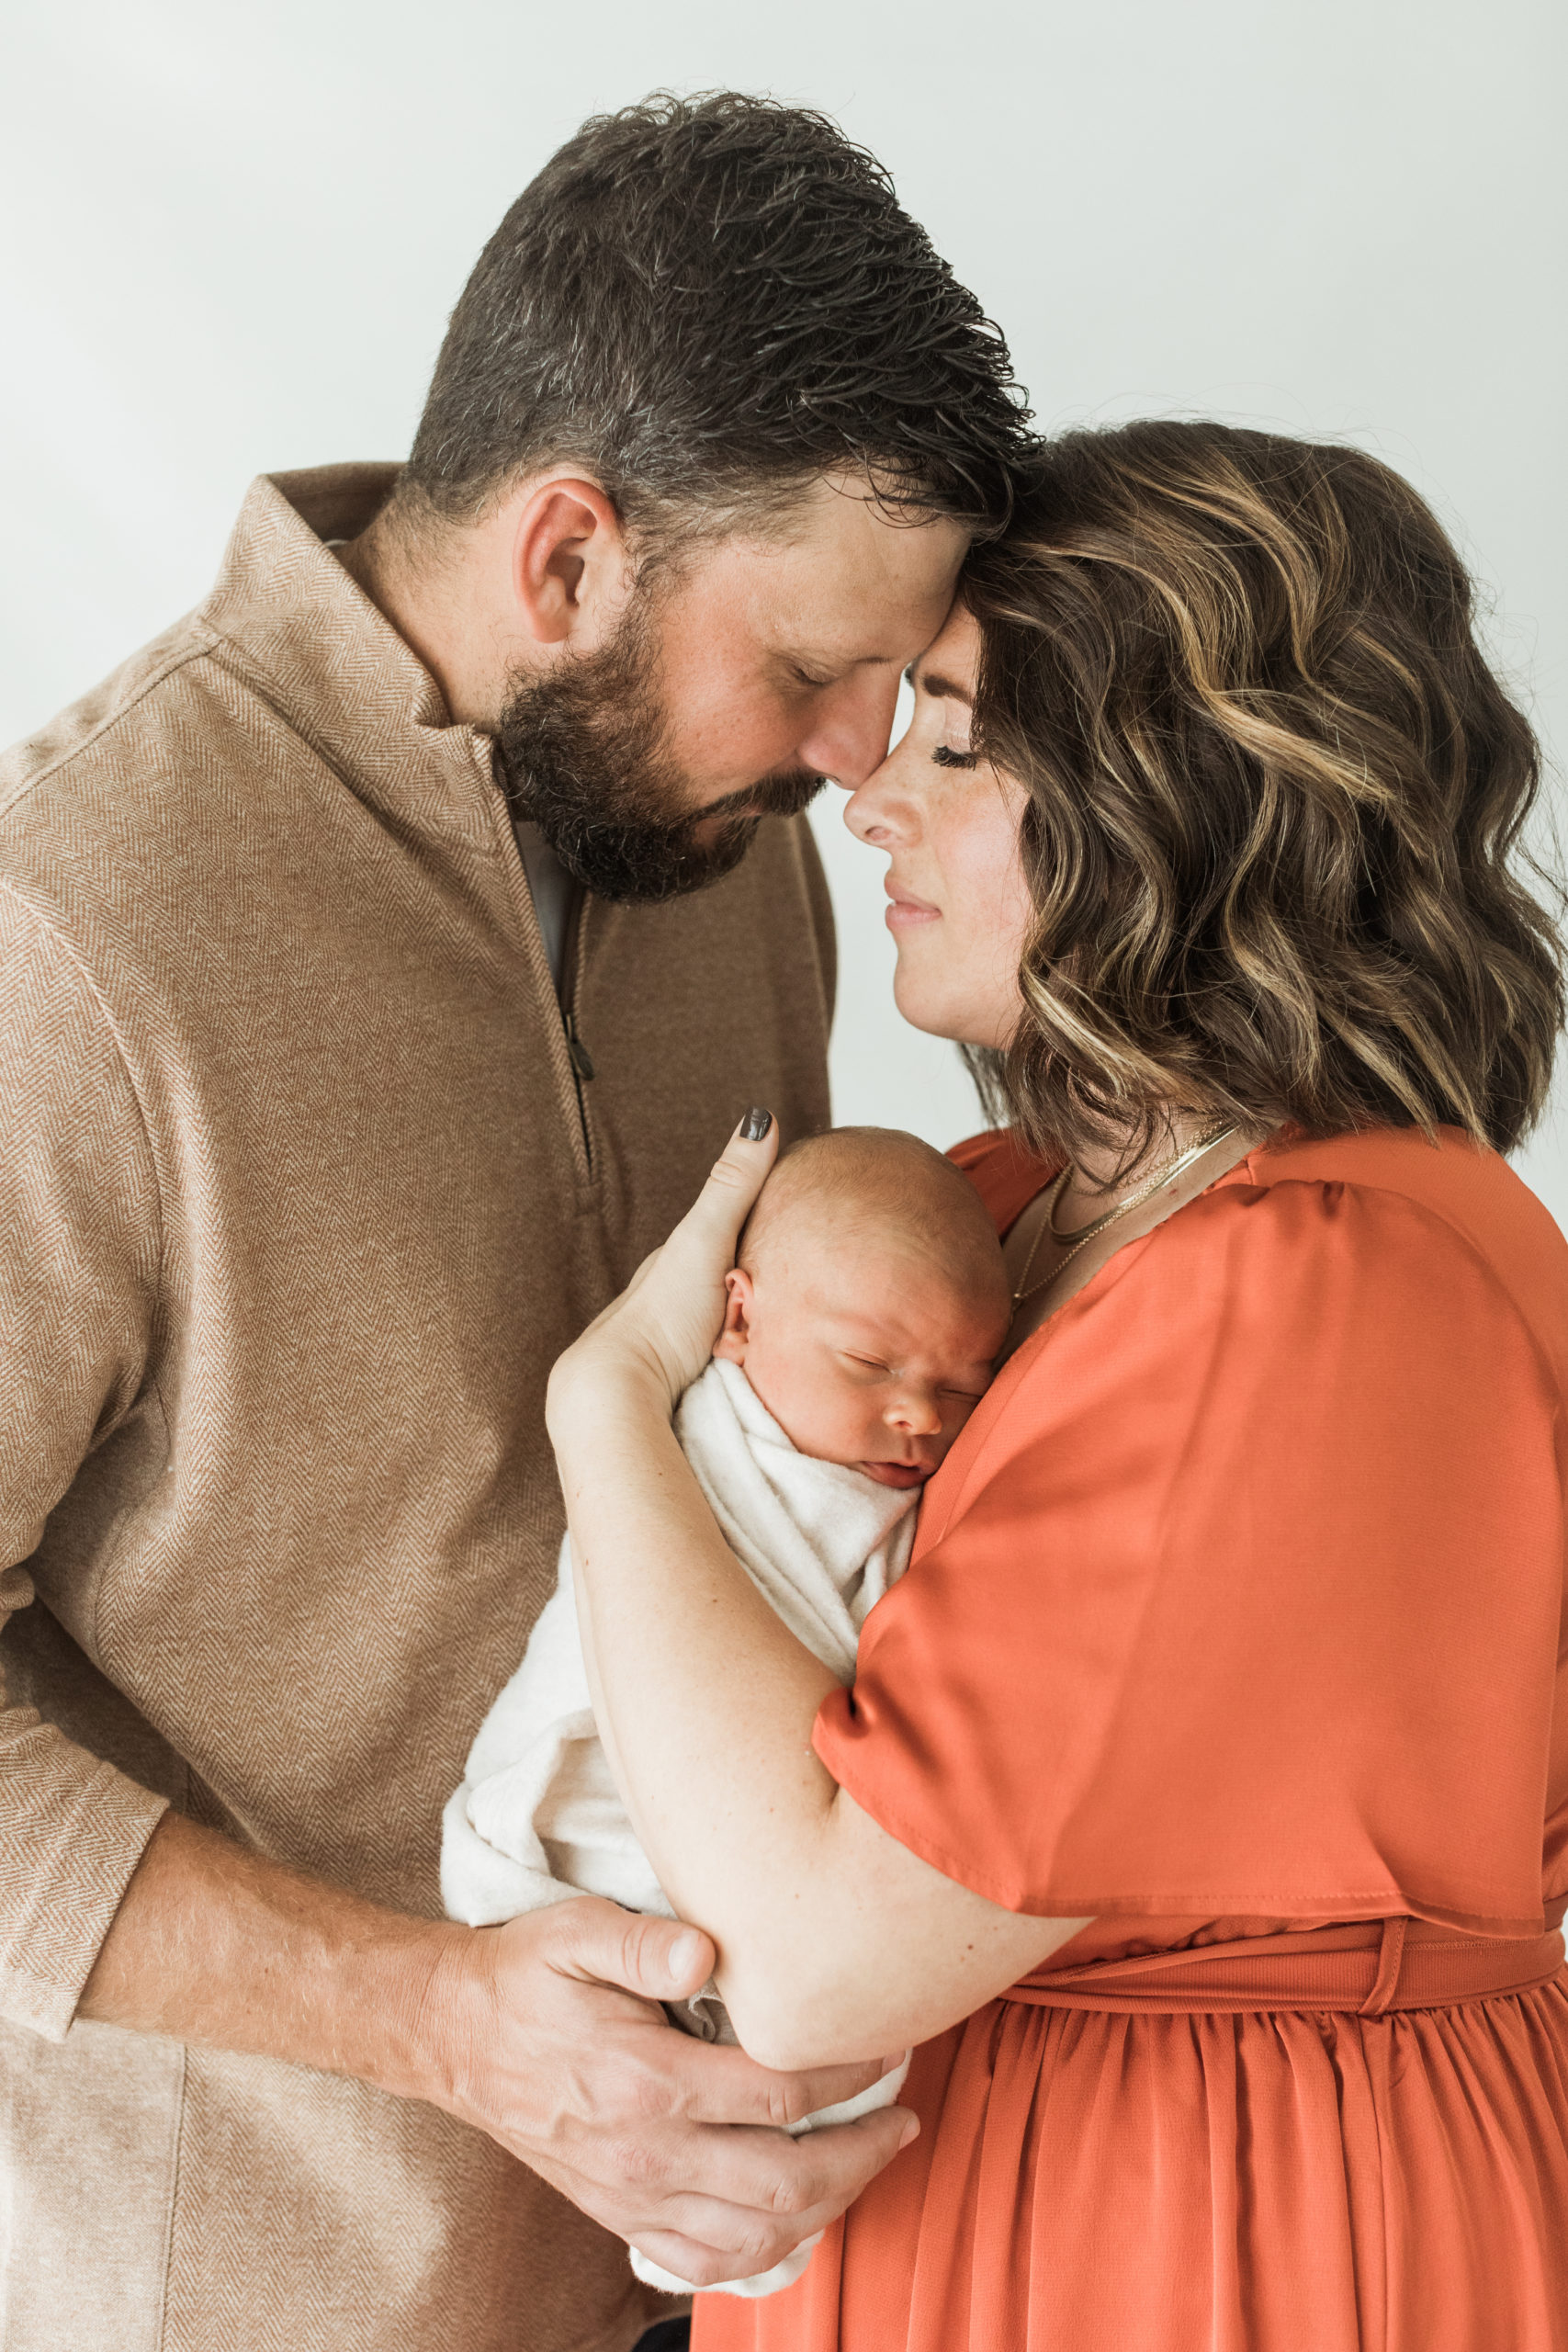 Photo of mom and dad with their newborn baby boy in mamas arms. Both parents holding baby wrapped in beige blanket and parents with their eyes closed and foreheads are touching.